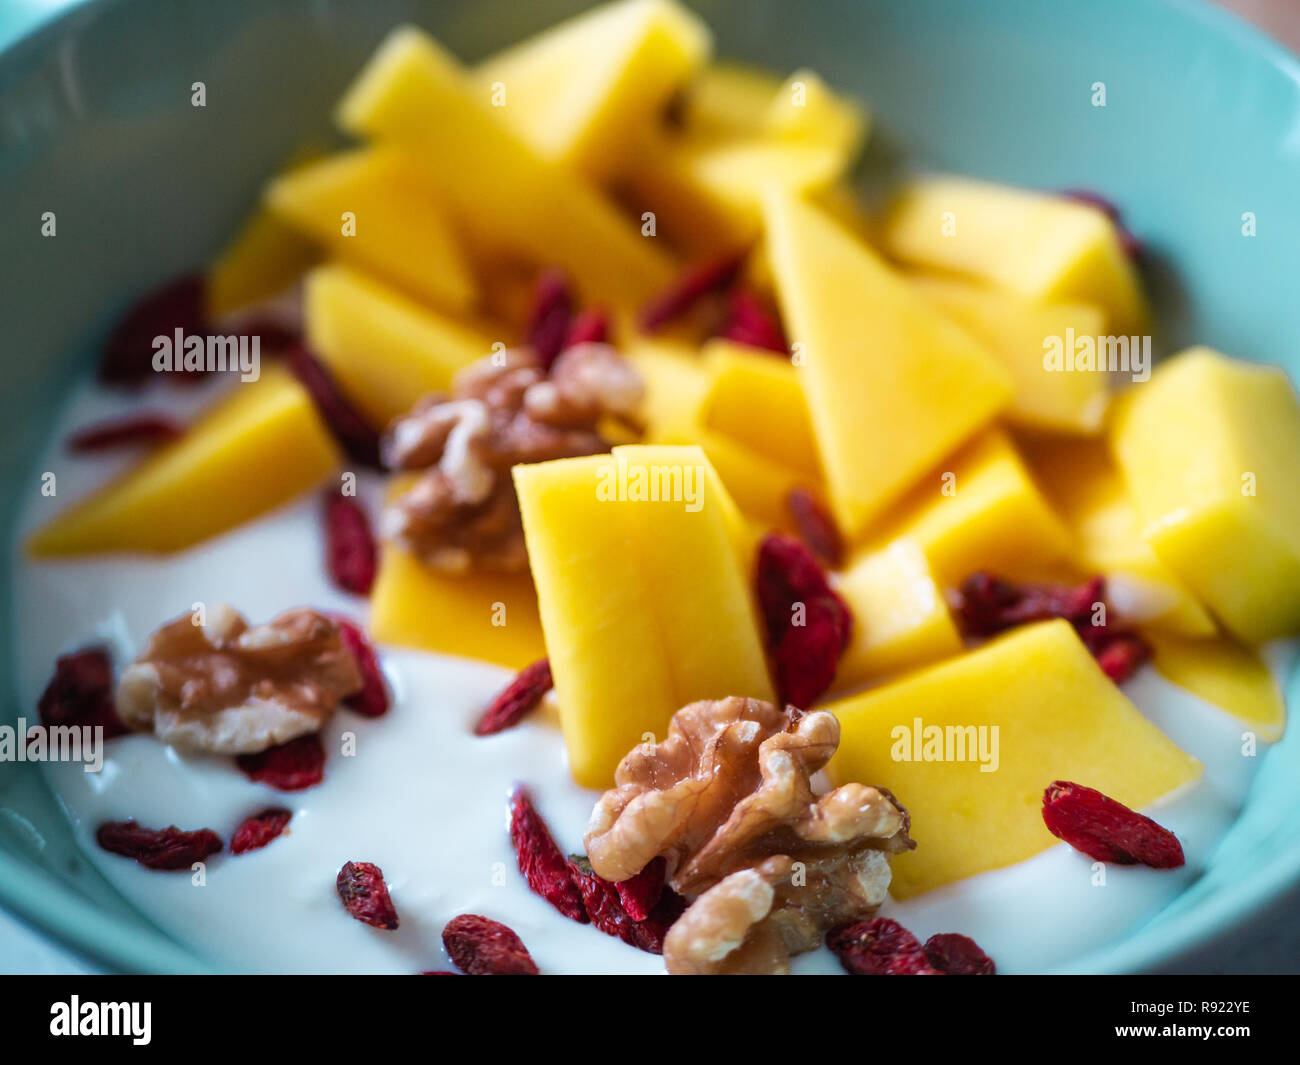 Delicious fruit bowl with mango, raspberry, goji berries and walnuts on red background Stock Photo